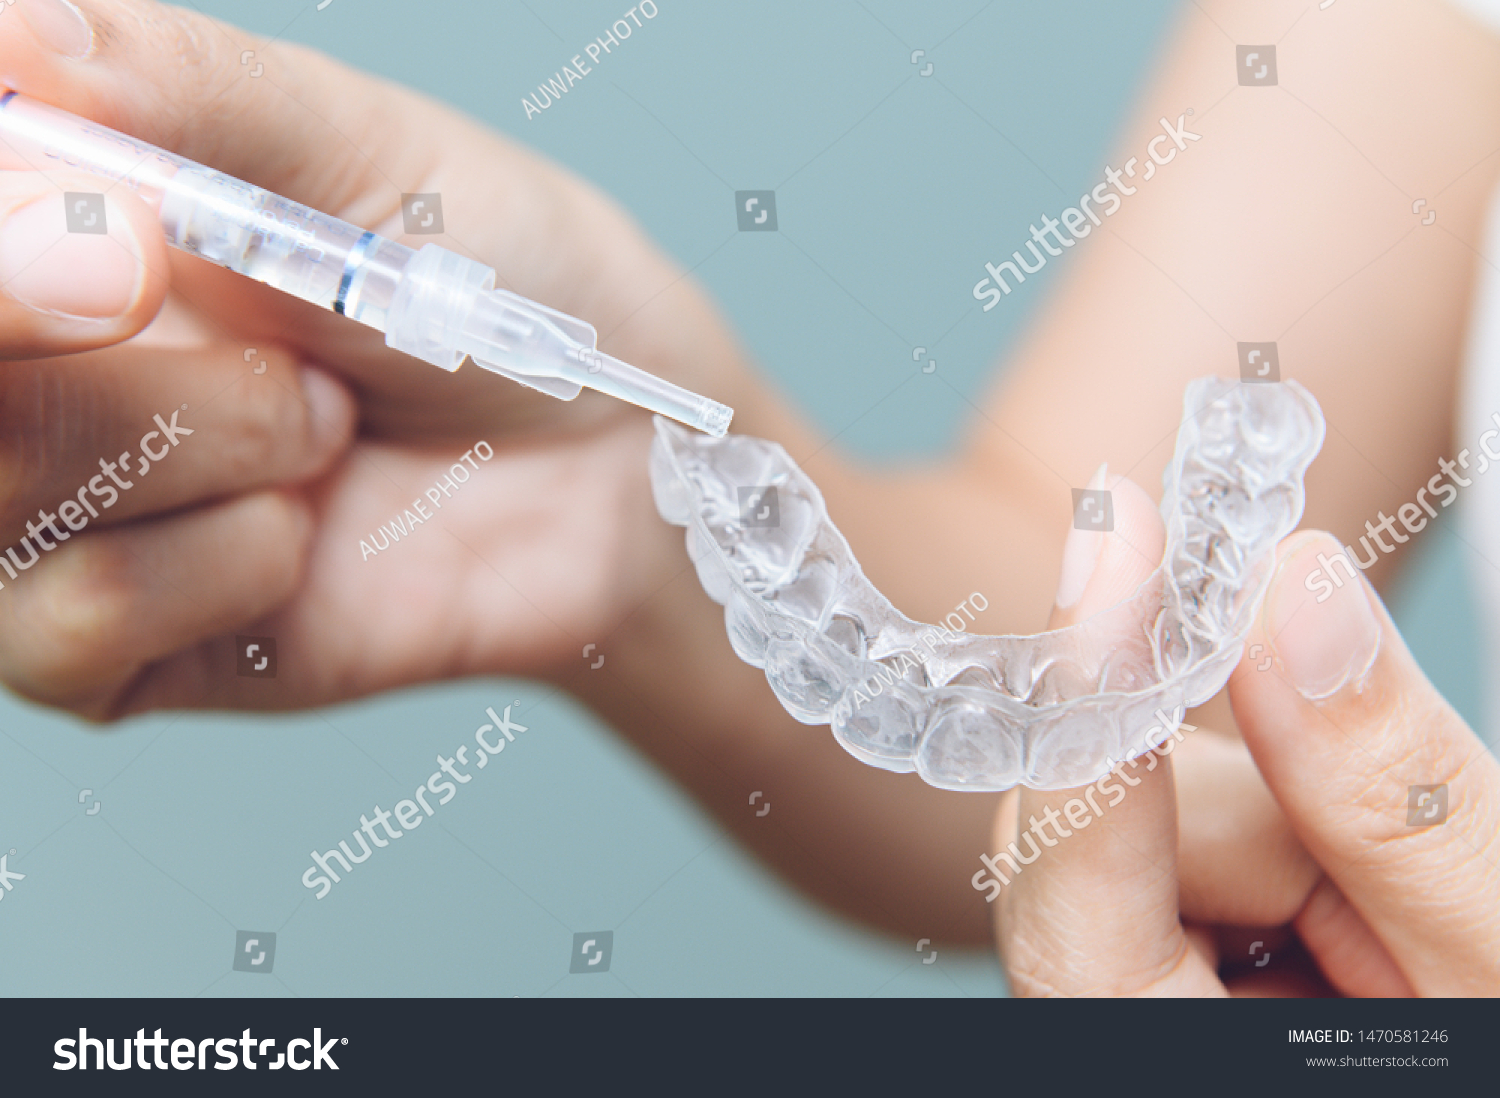 Tooth whitening gel being applied to a tooth mold in preparation for being placed in the mouth. #1470581246